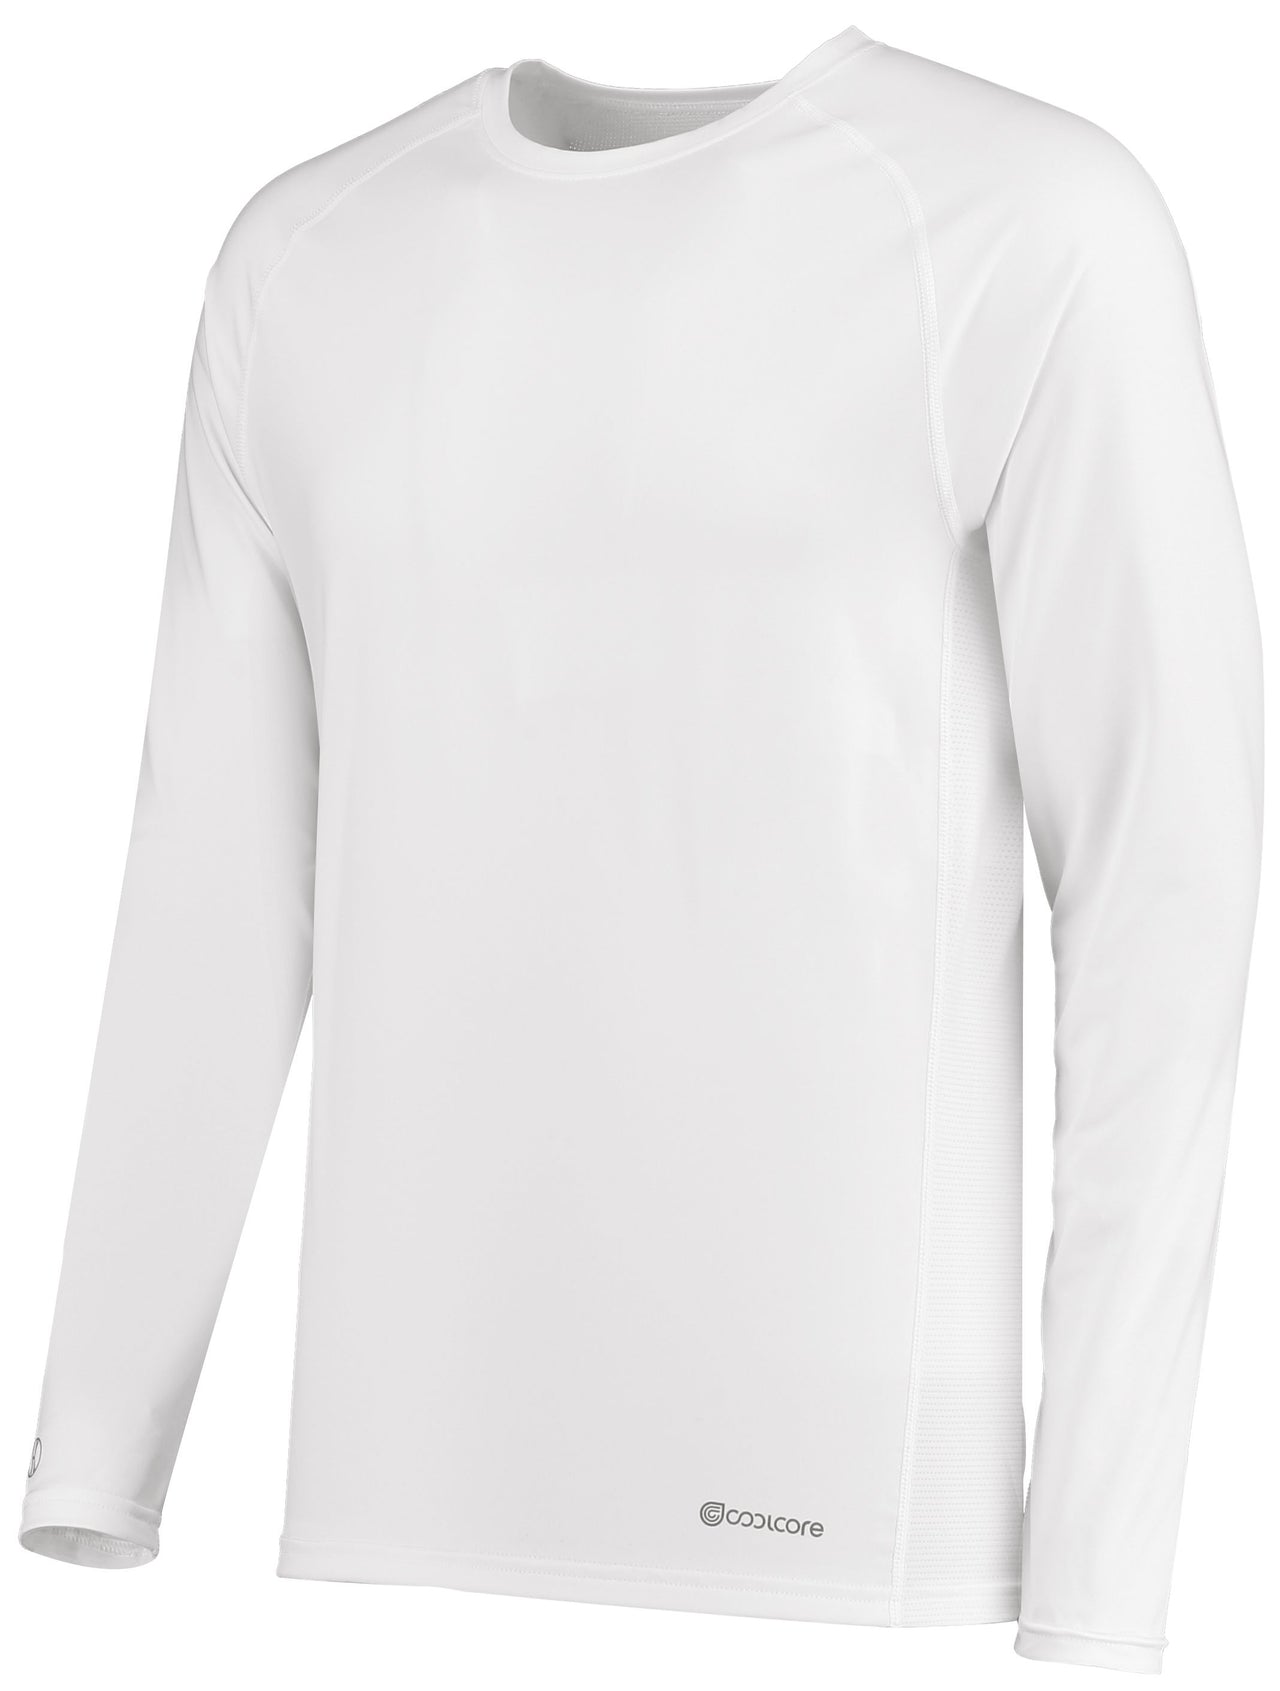 Youth Electrify Coolcore® Long Sleeve Tee - 222670